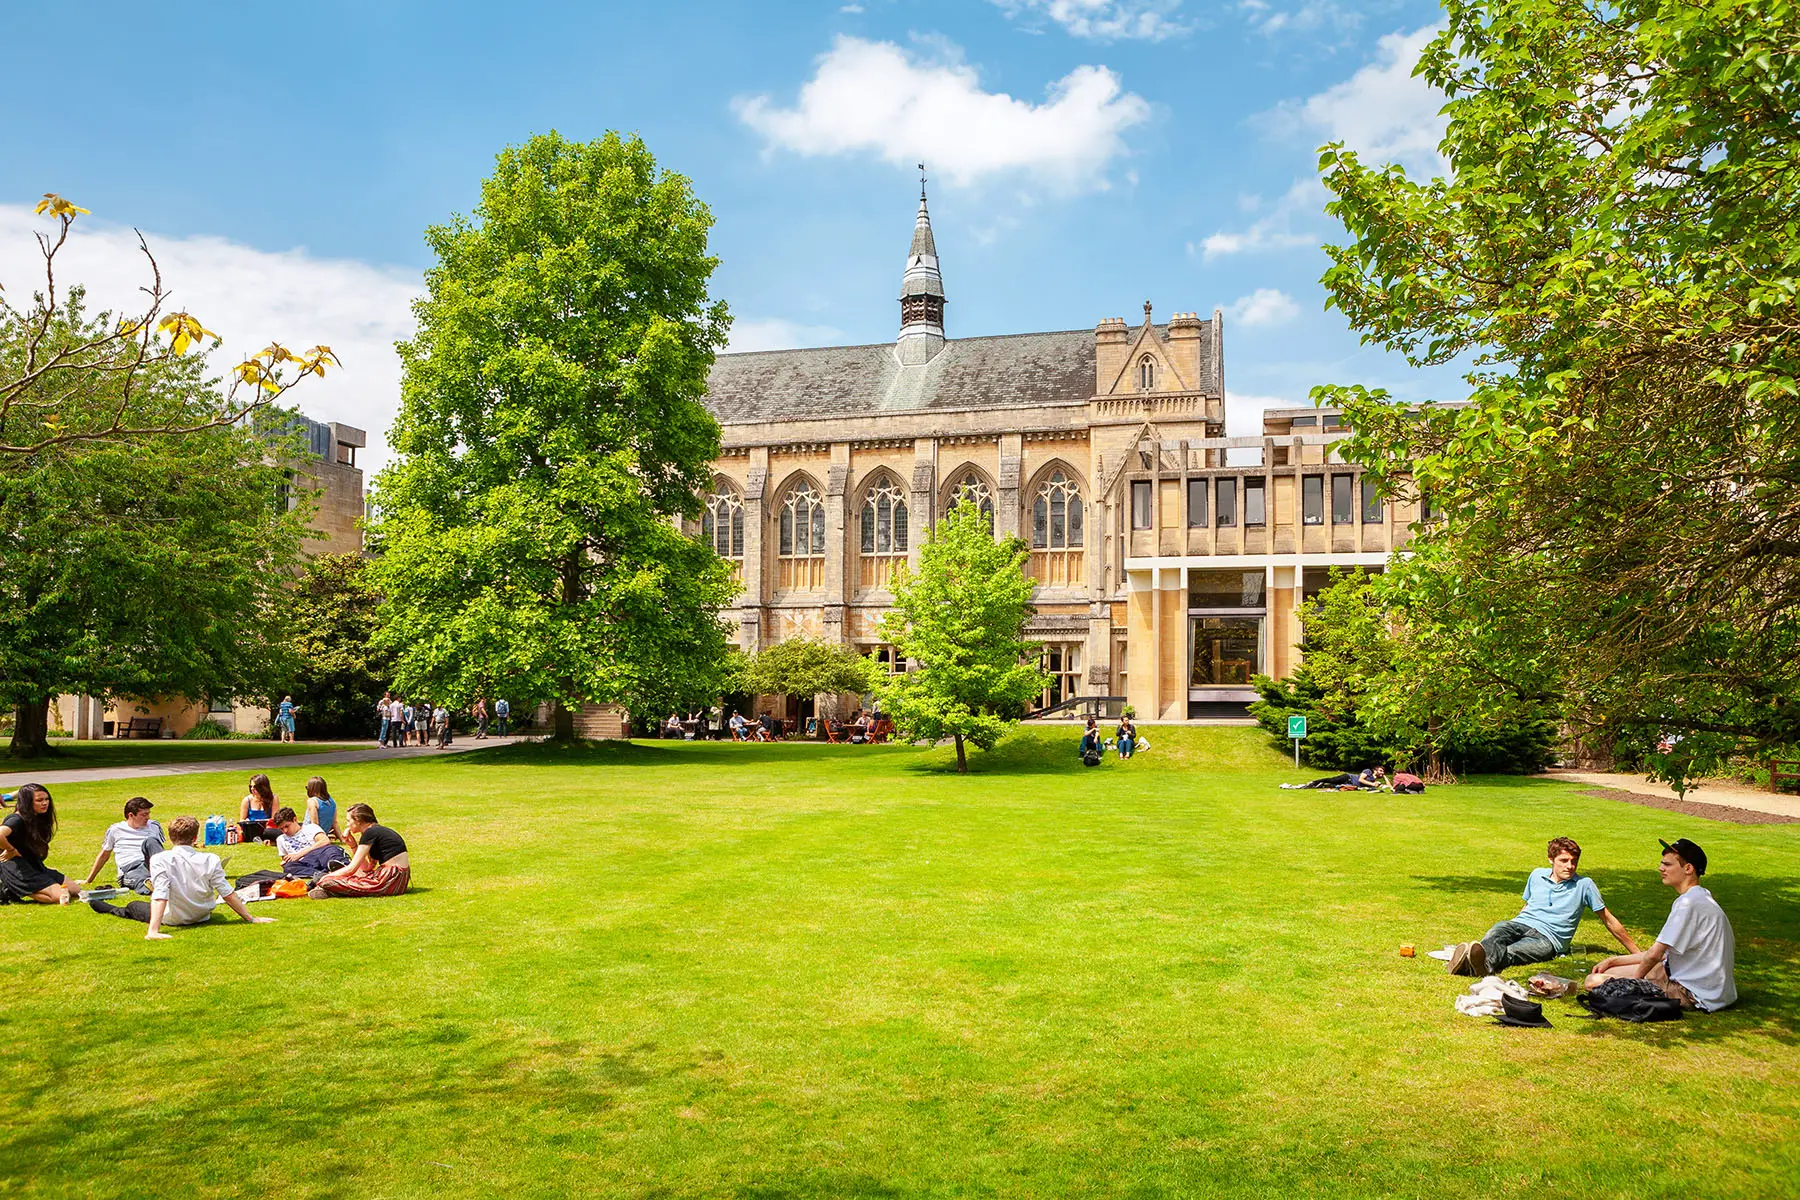 Students sitting on lawn at the University of Oxford